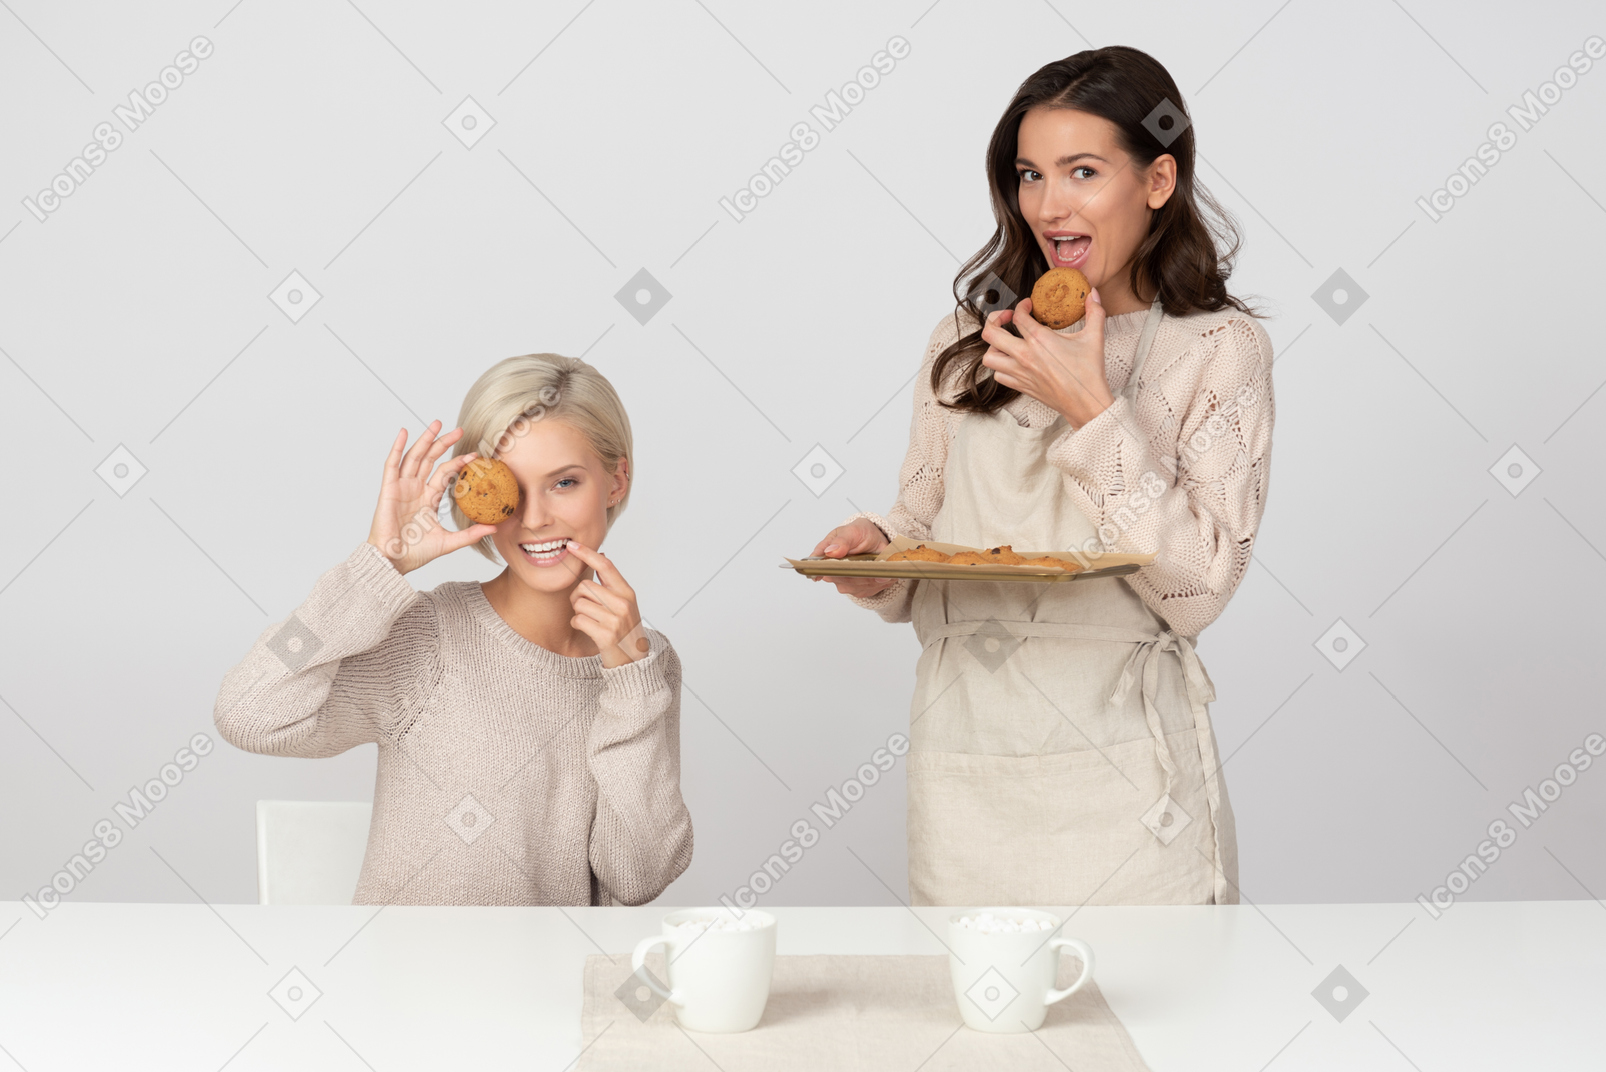 Young women fooling around with cookies